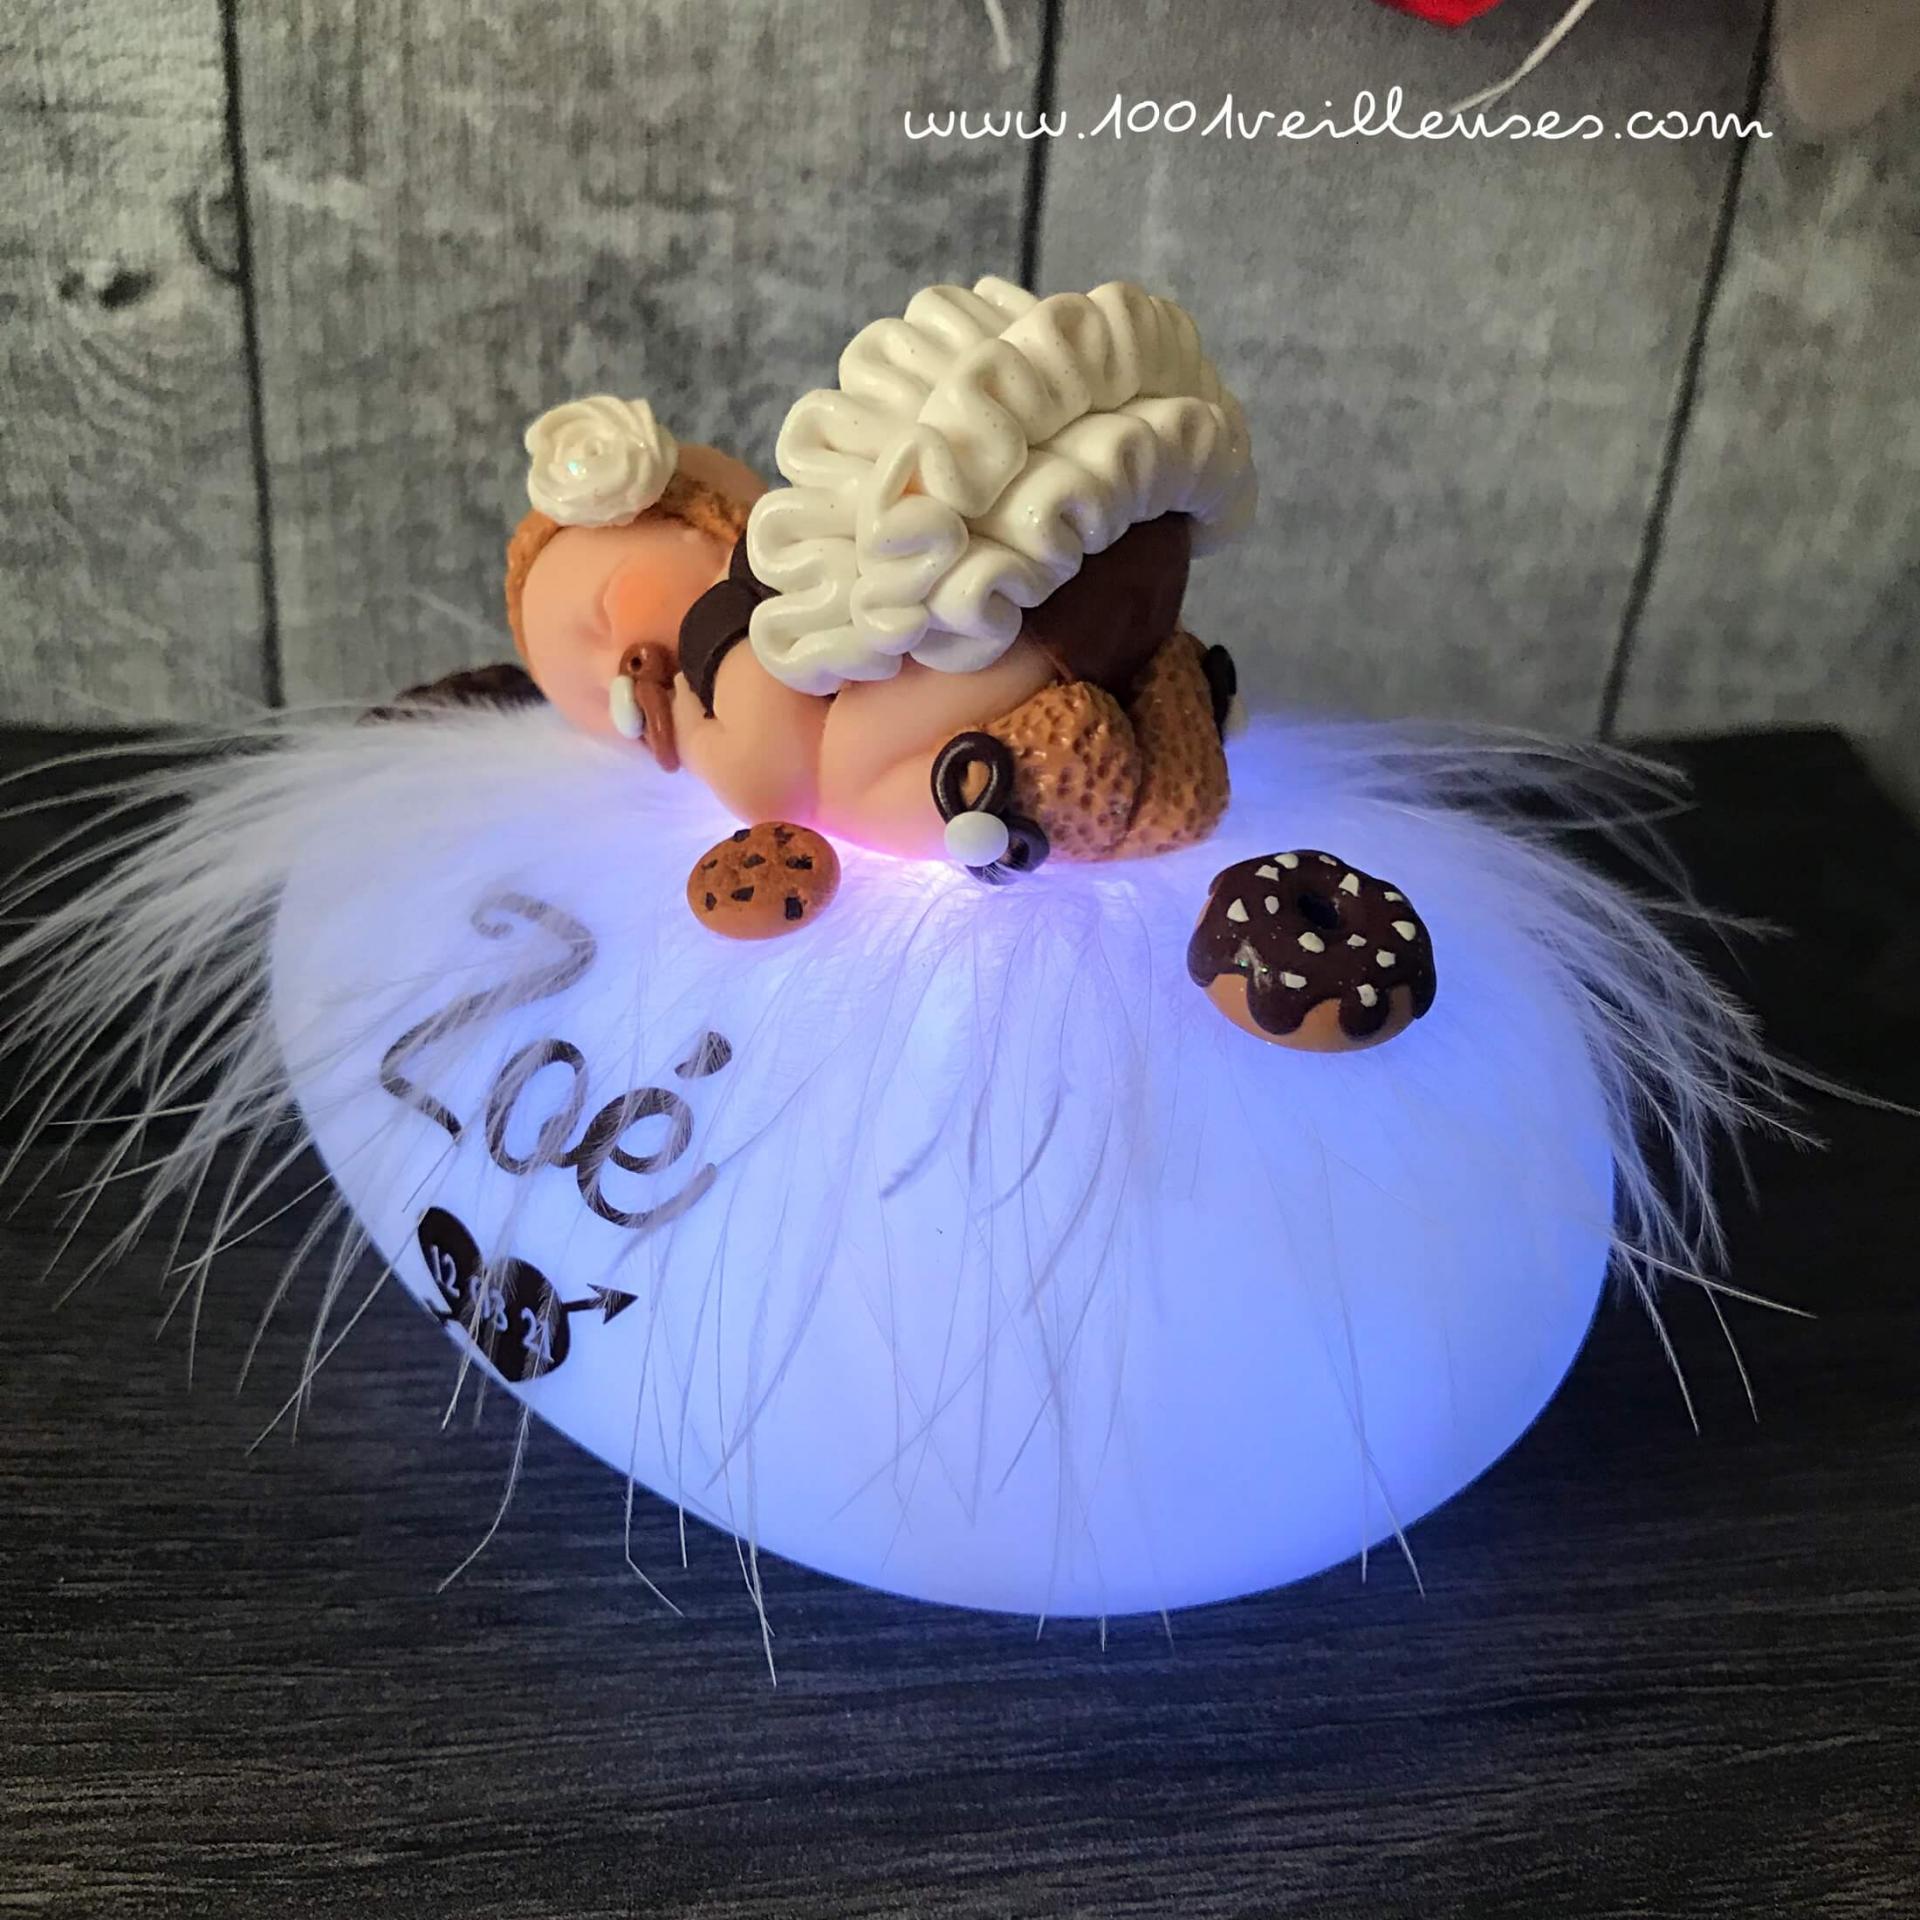 Artisanal customizable night light for a newborn, ideal rare and unique birth gift for a girl